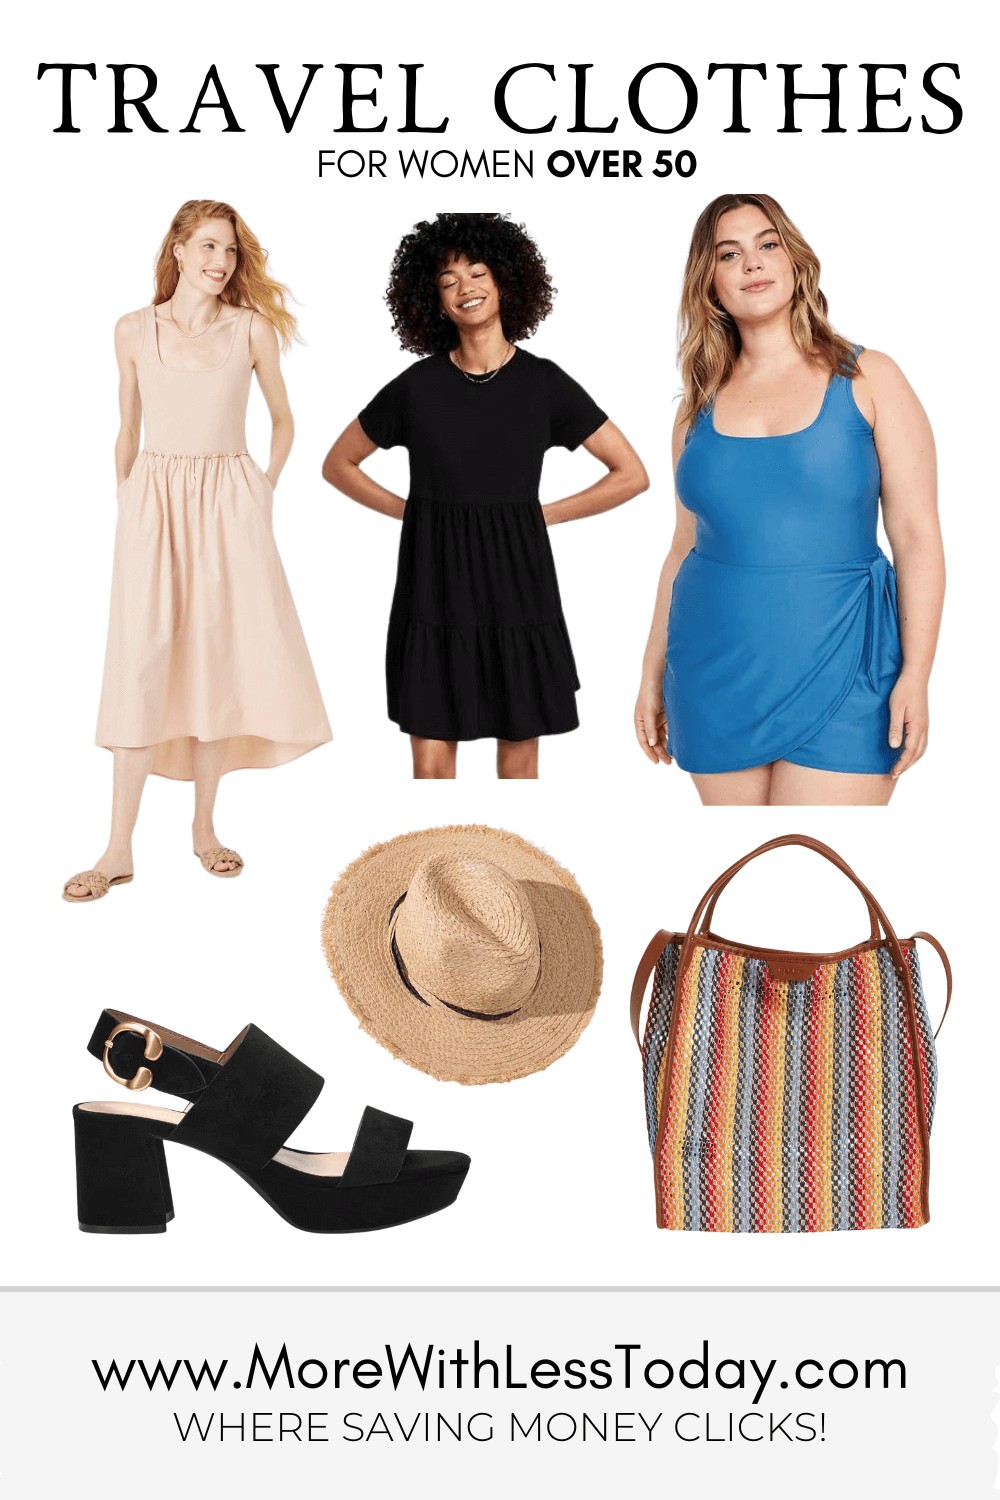 Travel Clothes for Women Over 50 - PIN